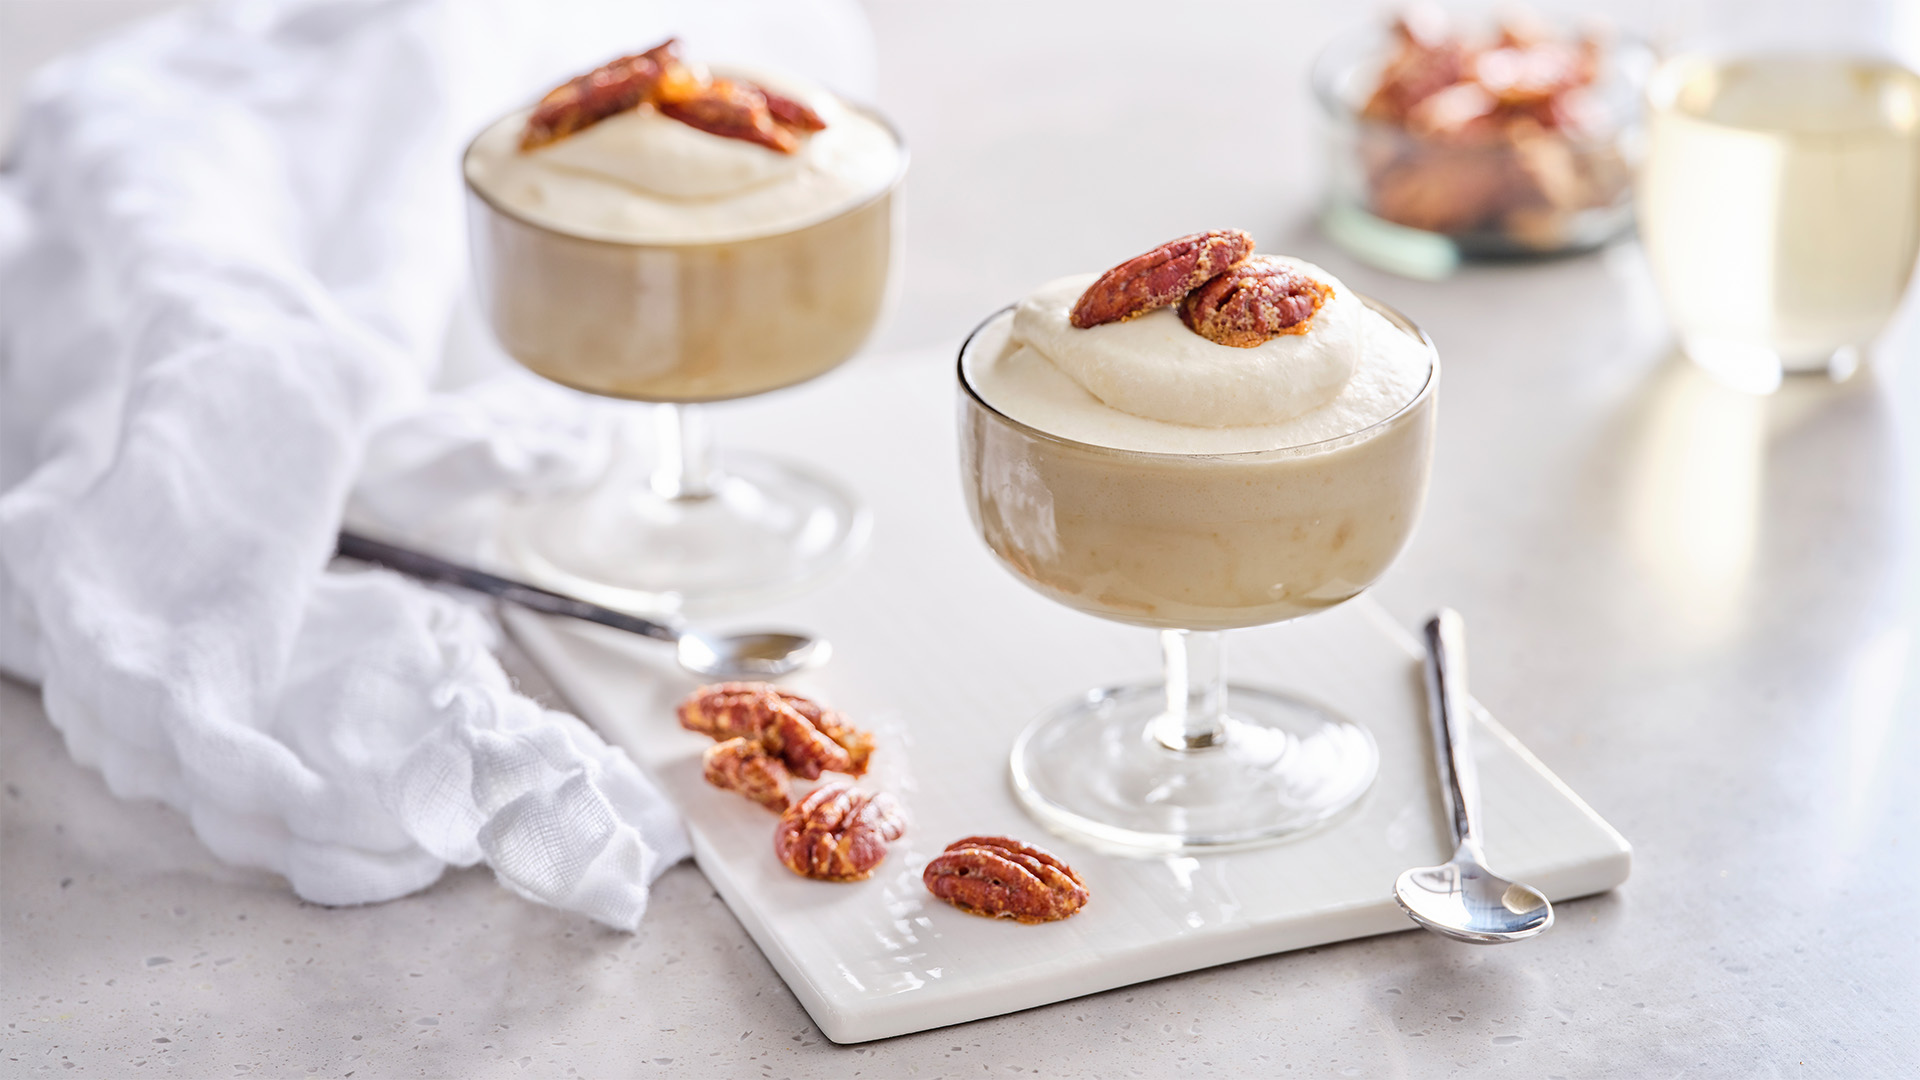 Two Maple mousse filled glasses on white serving board next to some pecan pieces, small silver spoons and a white napkin.